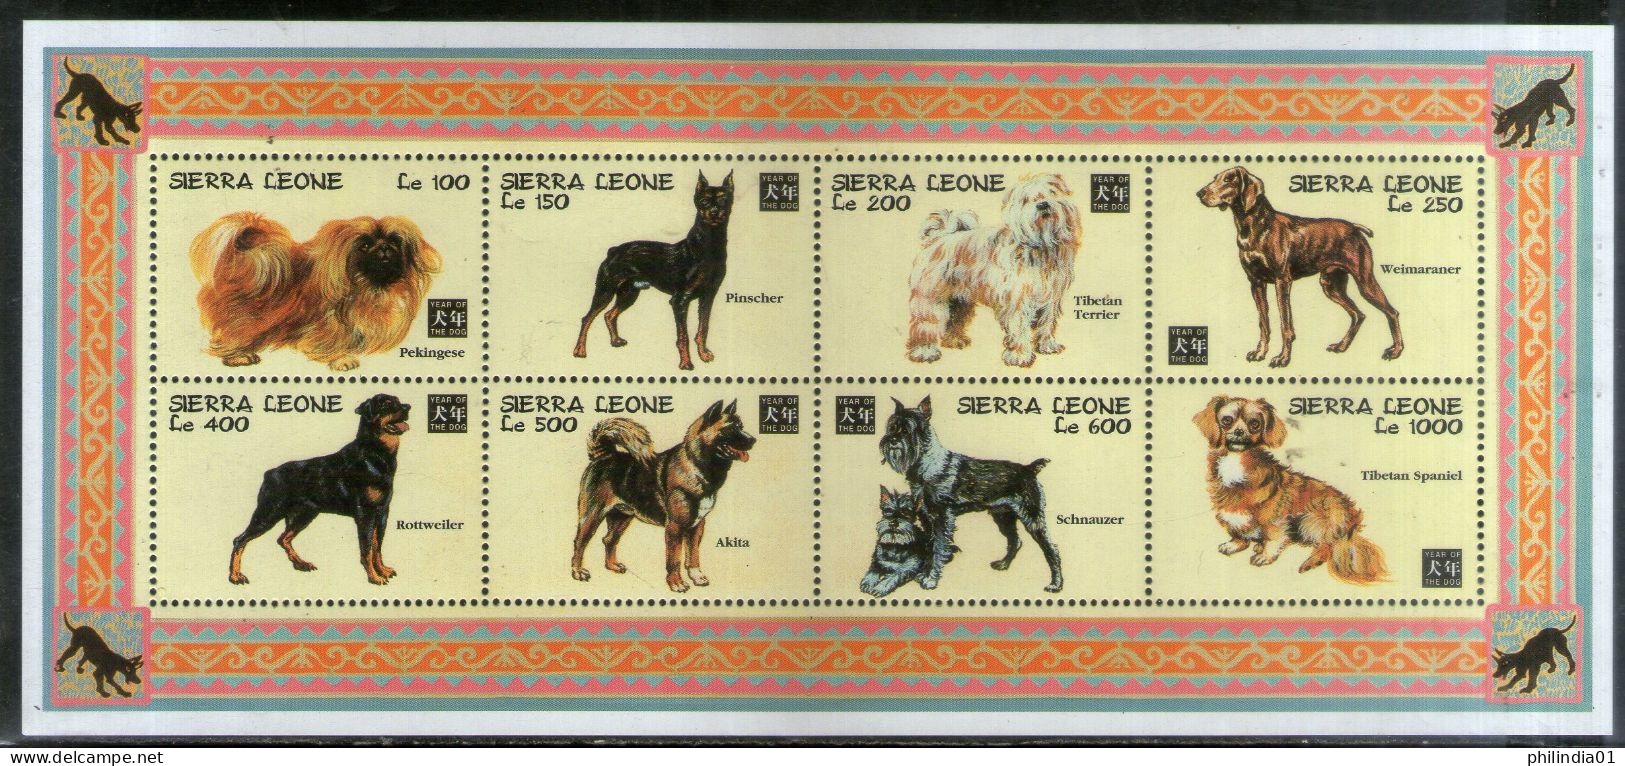 Sierra Leone 1994 Chinese New Year Dogs Animals Sc 1717 Sheetlet MNH # 6330 - Dogs